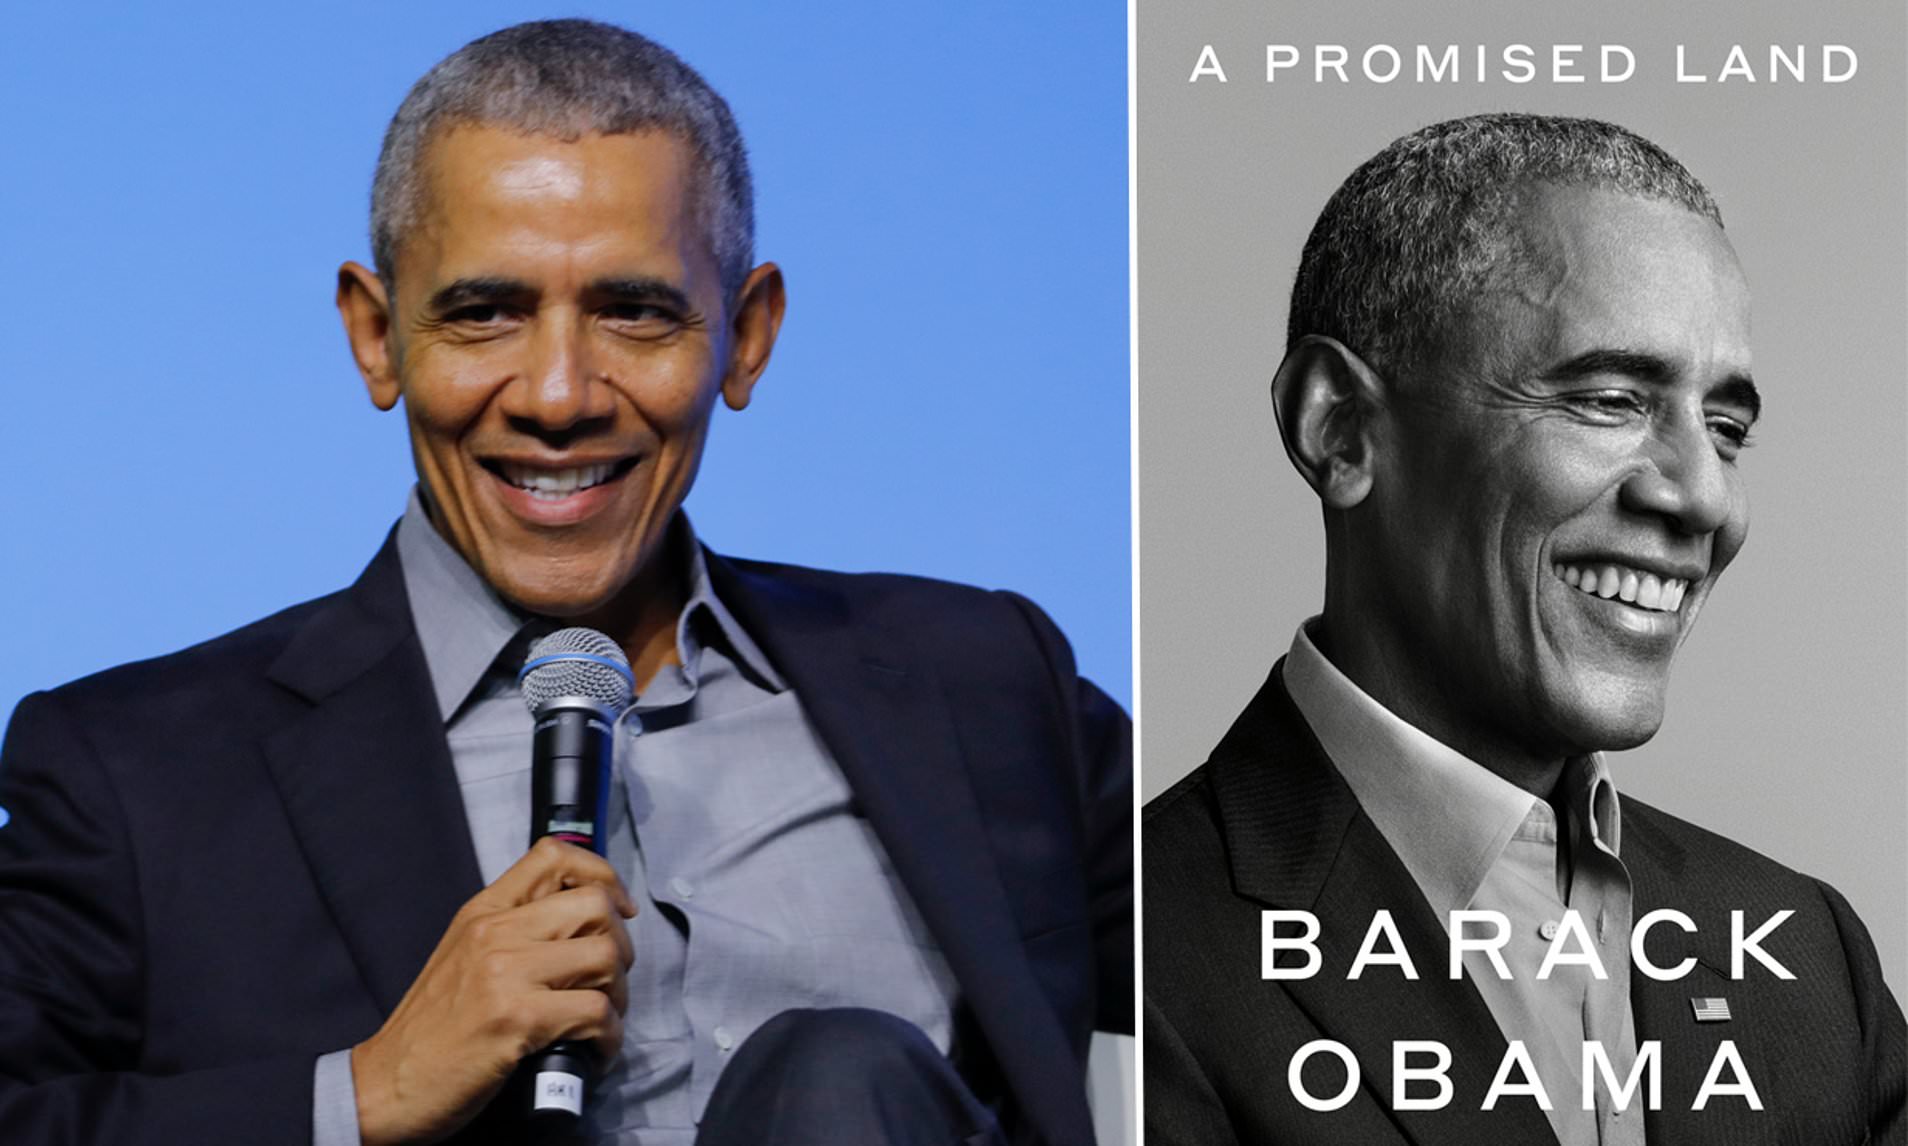 Frontlist | Obama's ‘A Promised Land’ breaks record with 1.7 million sales